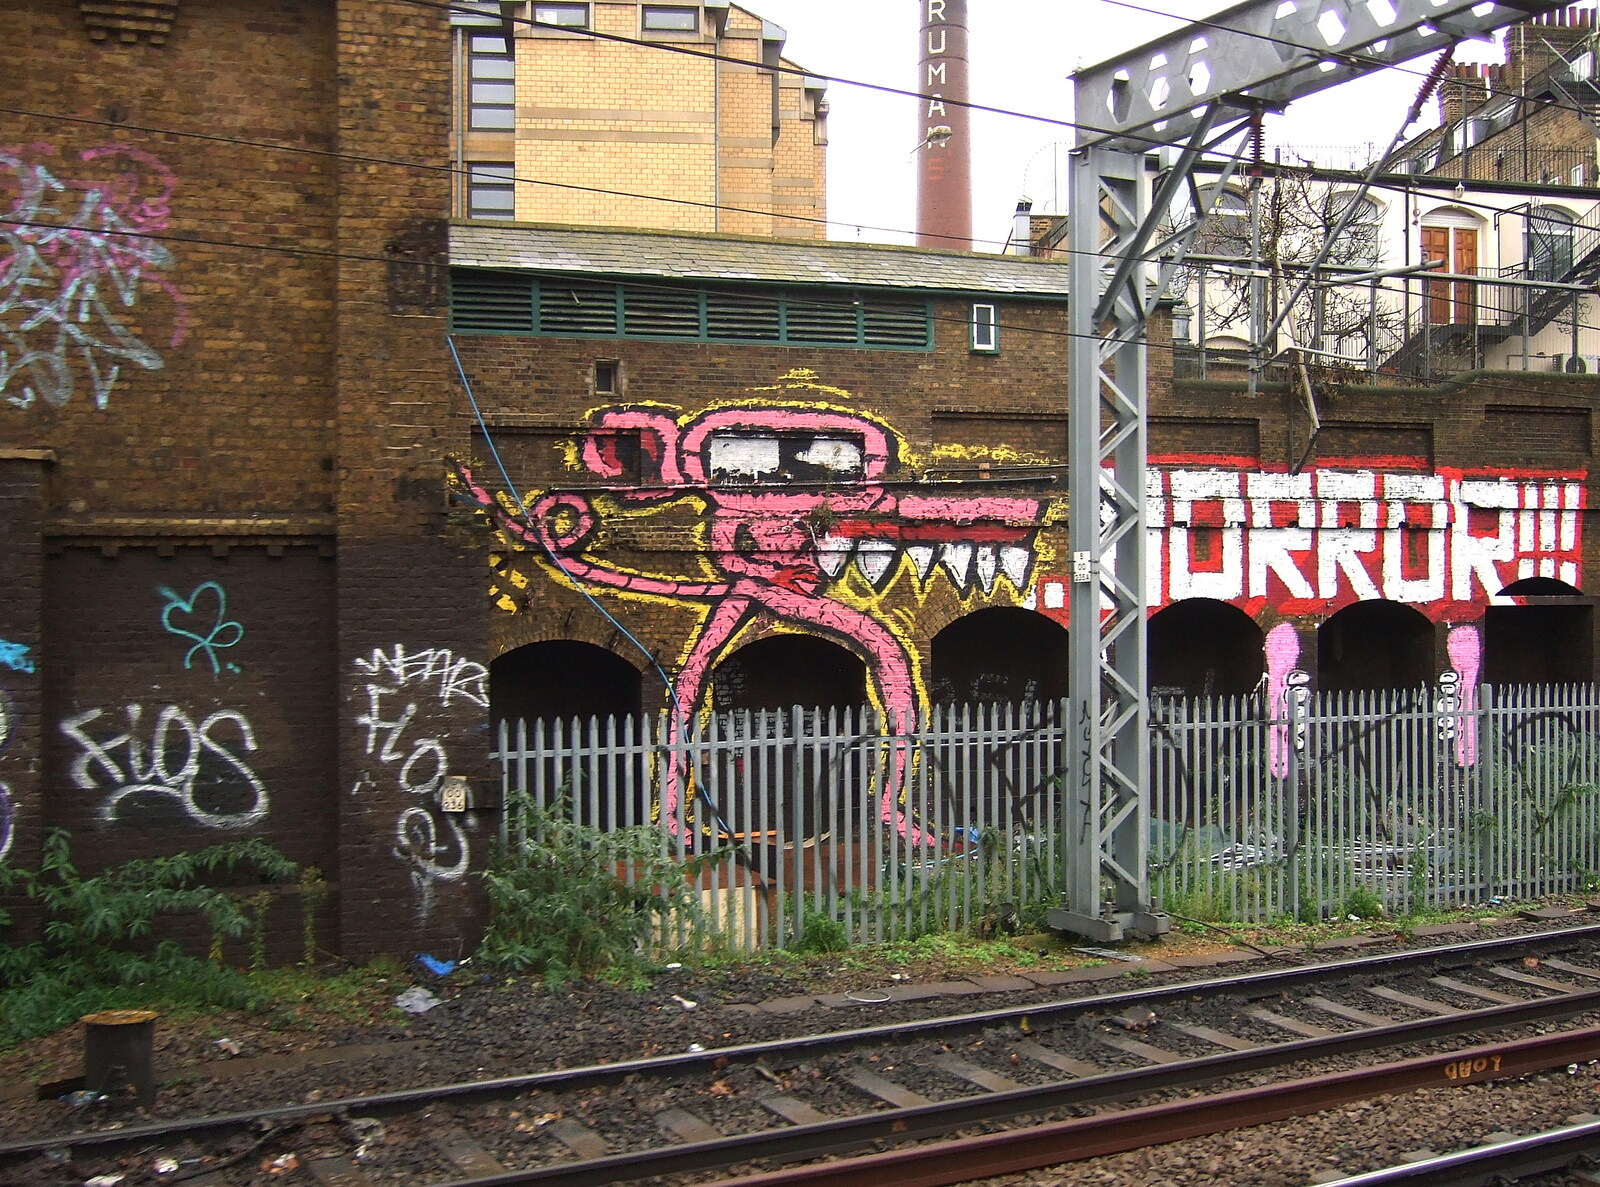 The pink octopus graffiti monster from Railway Randomness, and Grandad Sets Fire to Stuff, London and Brome, Suffolk - 22nd January 2012